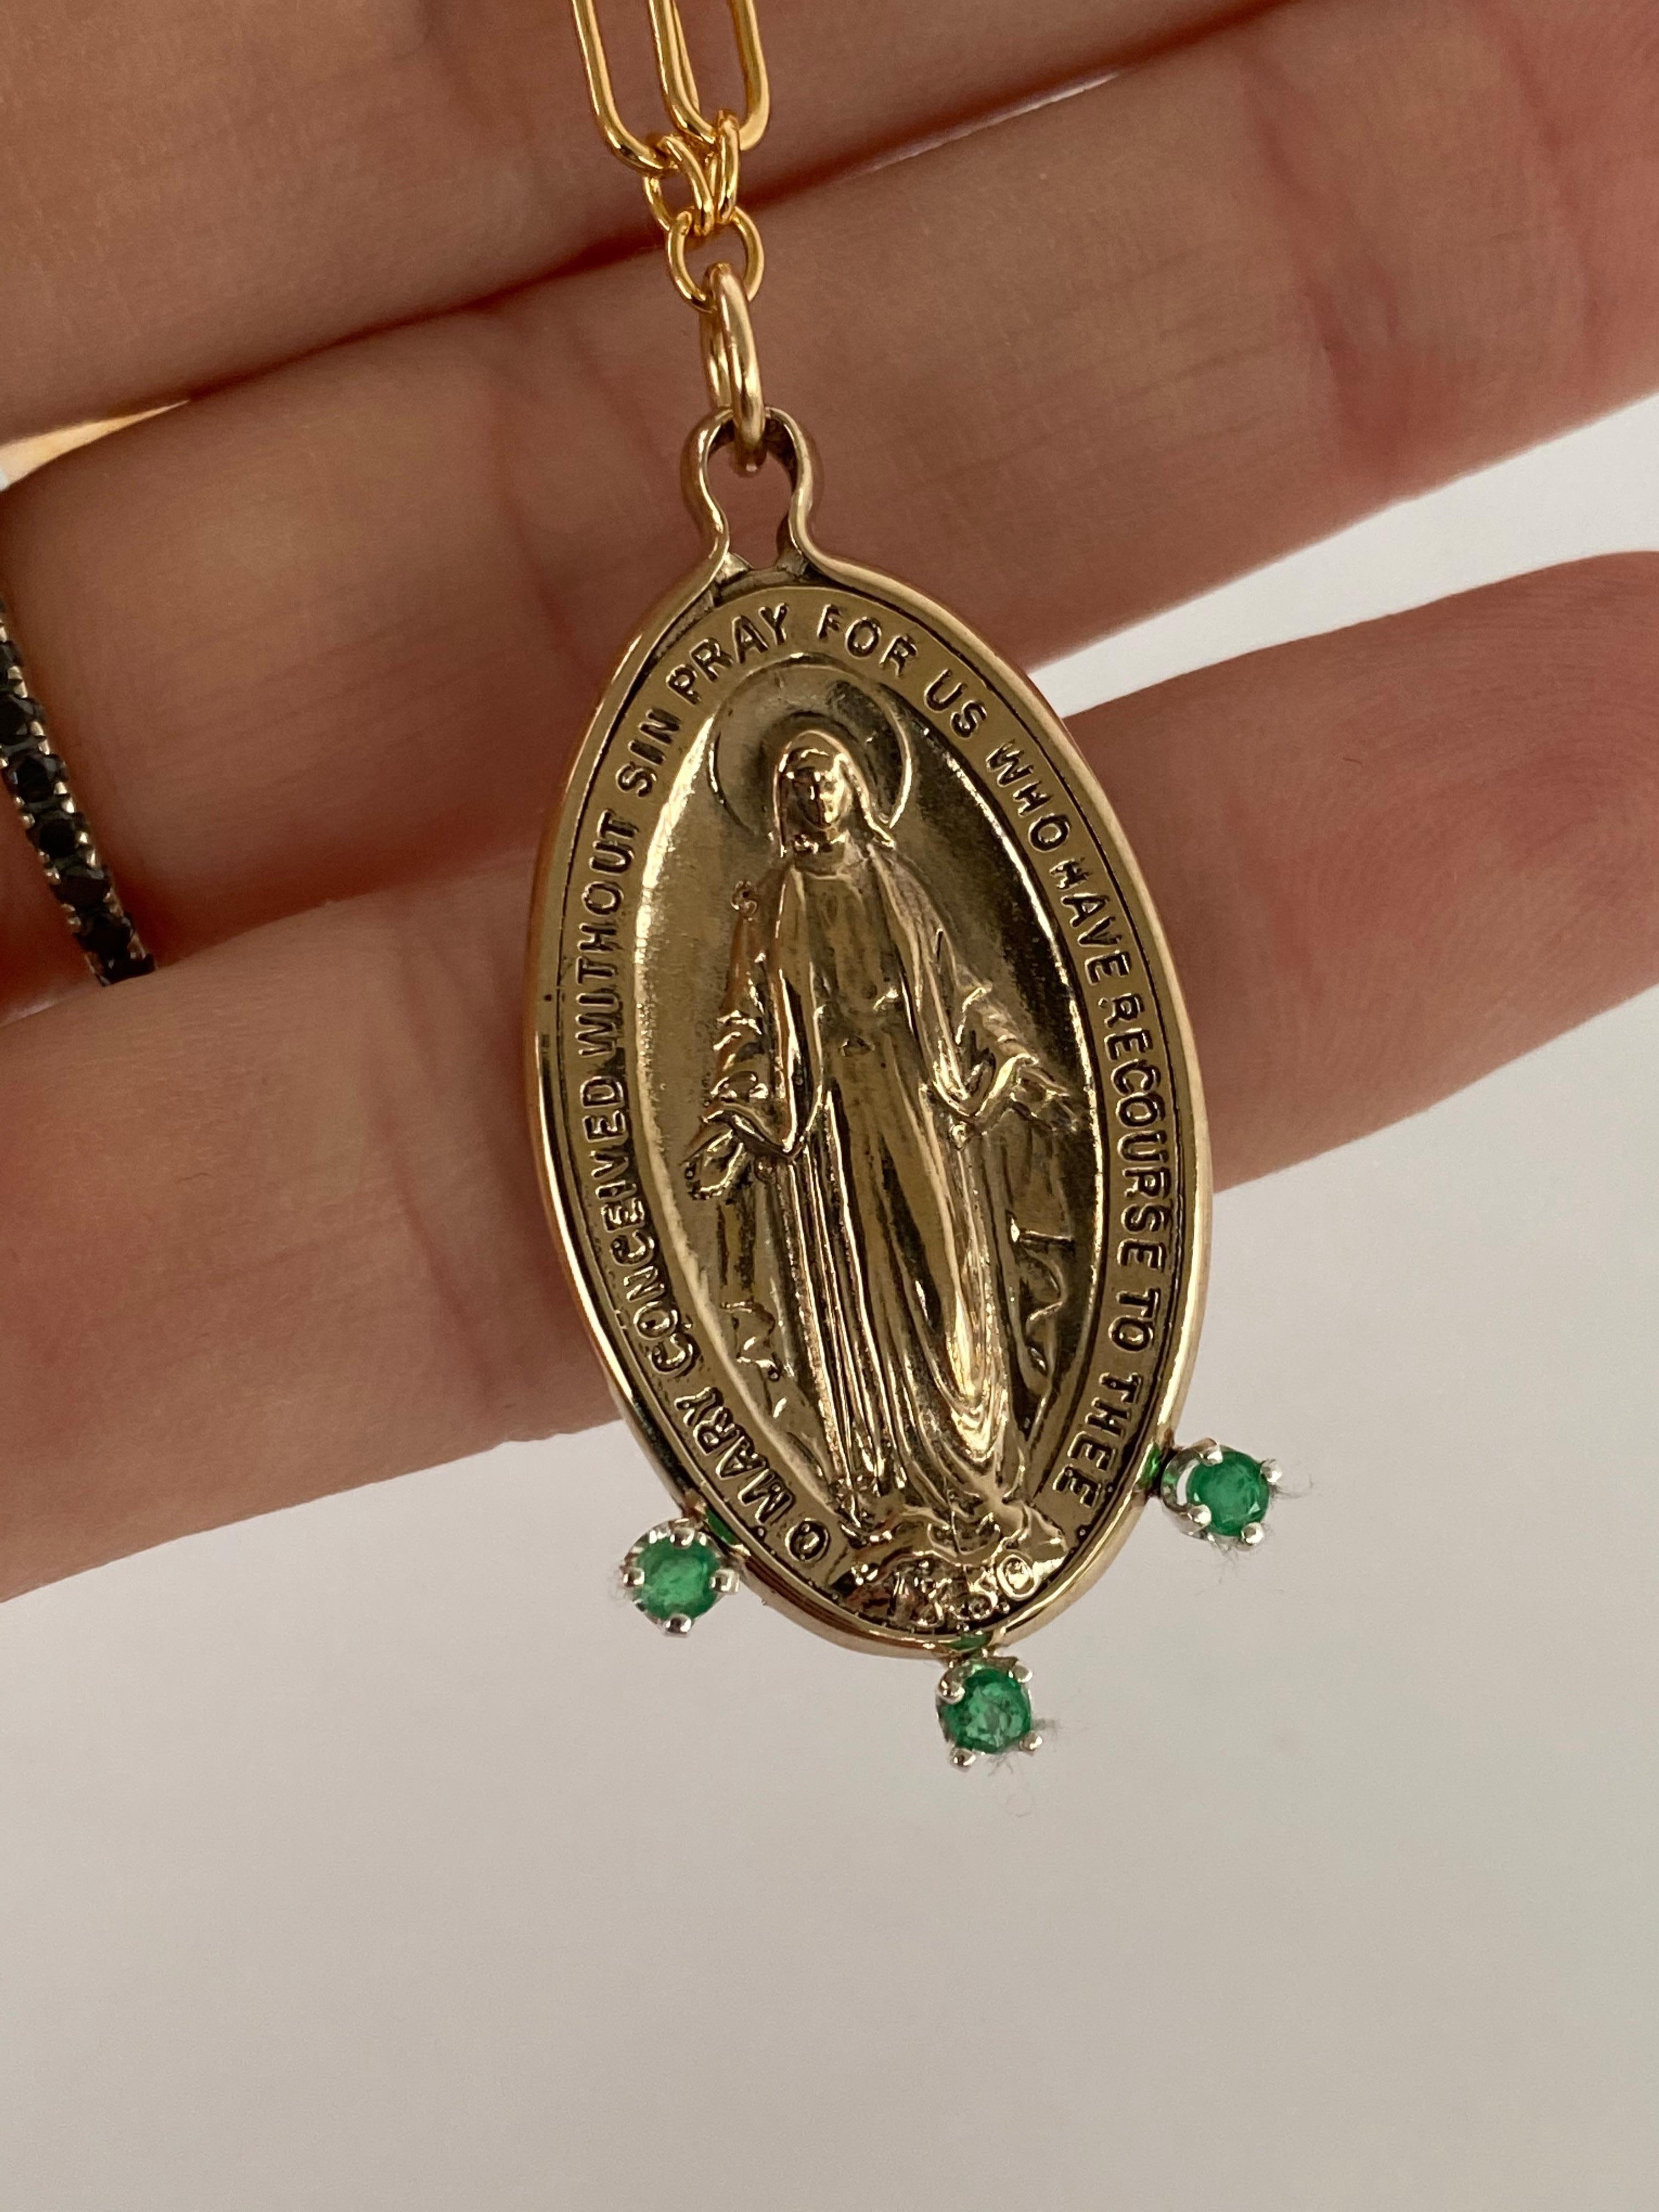 Emerald Virgin Mary Medal Chunky Chain Necklace Bronze Gold Filled J Dauphin

Exclusive piece of a Miraculous Medal Oval pendant called  